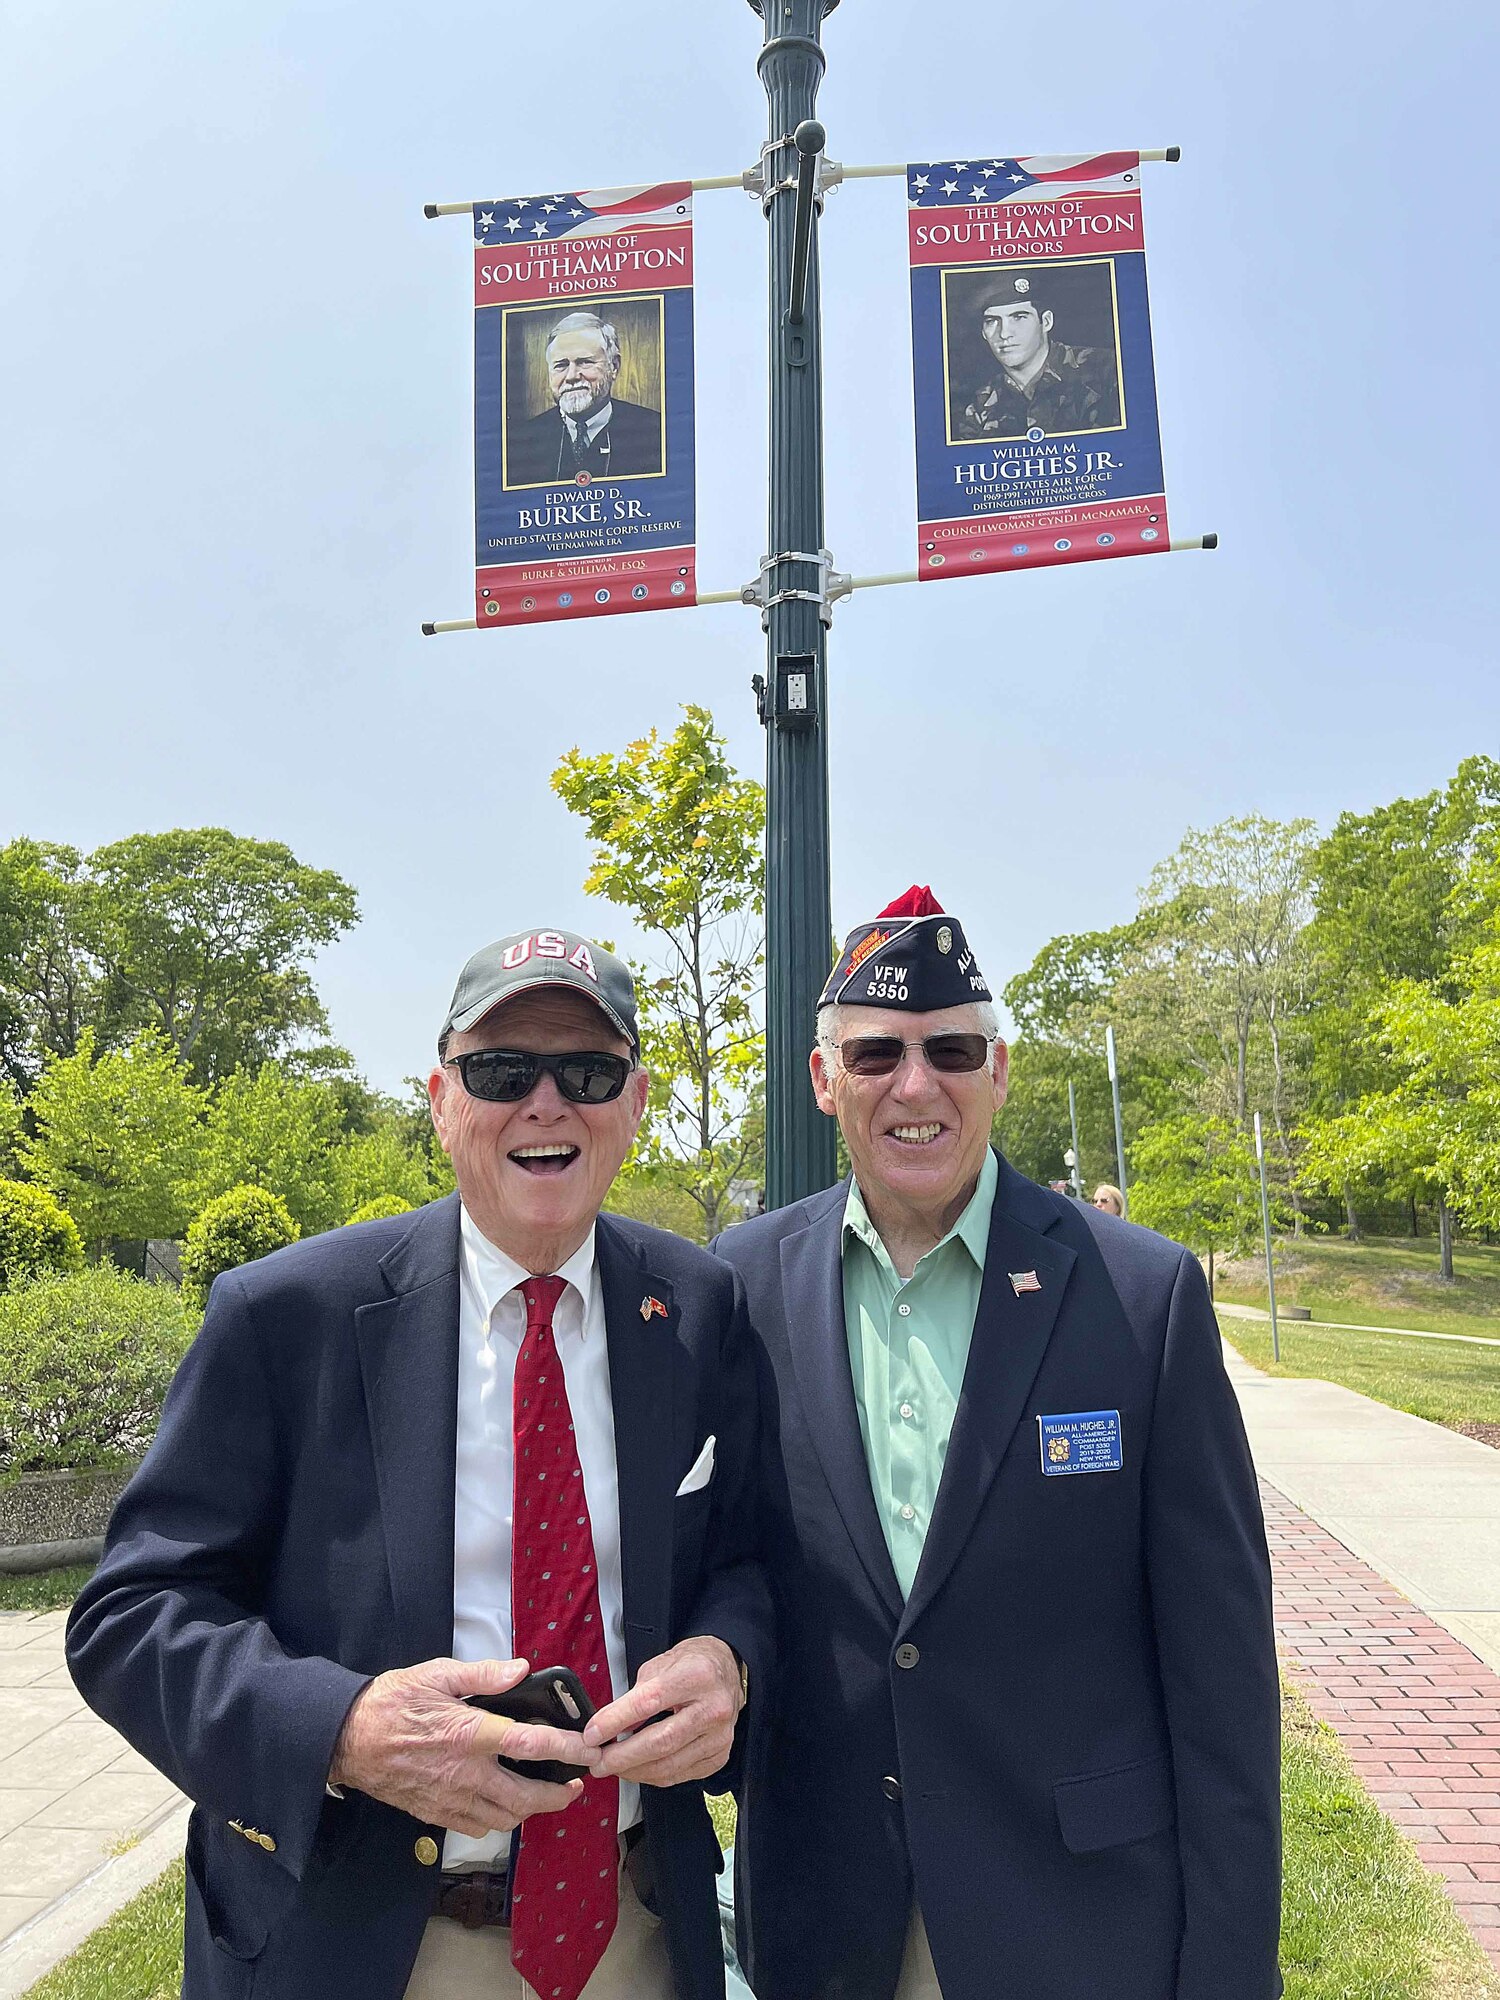 Judge Edward D. Burke Sr. and William M. Hughes Jr. with their banners in Good Ground Park.  DANA SHAW